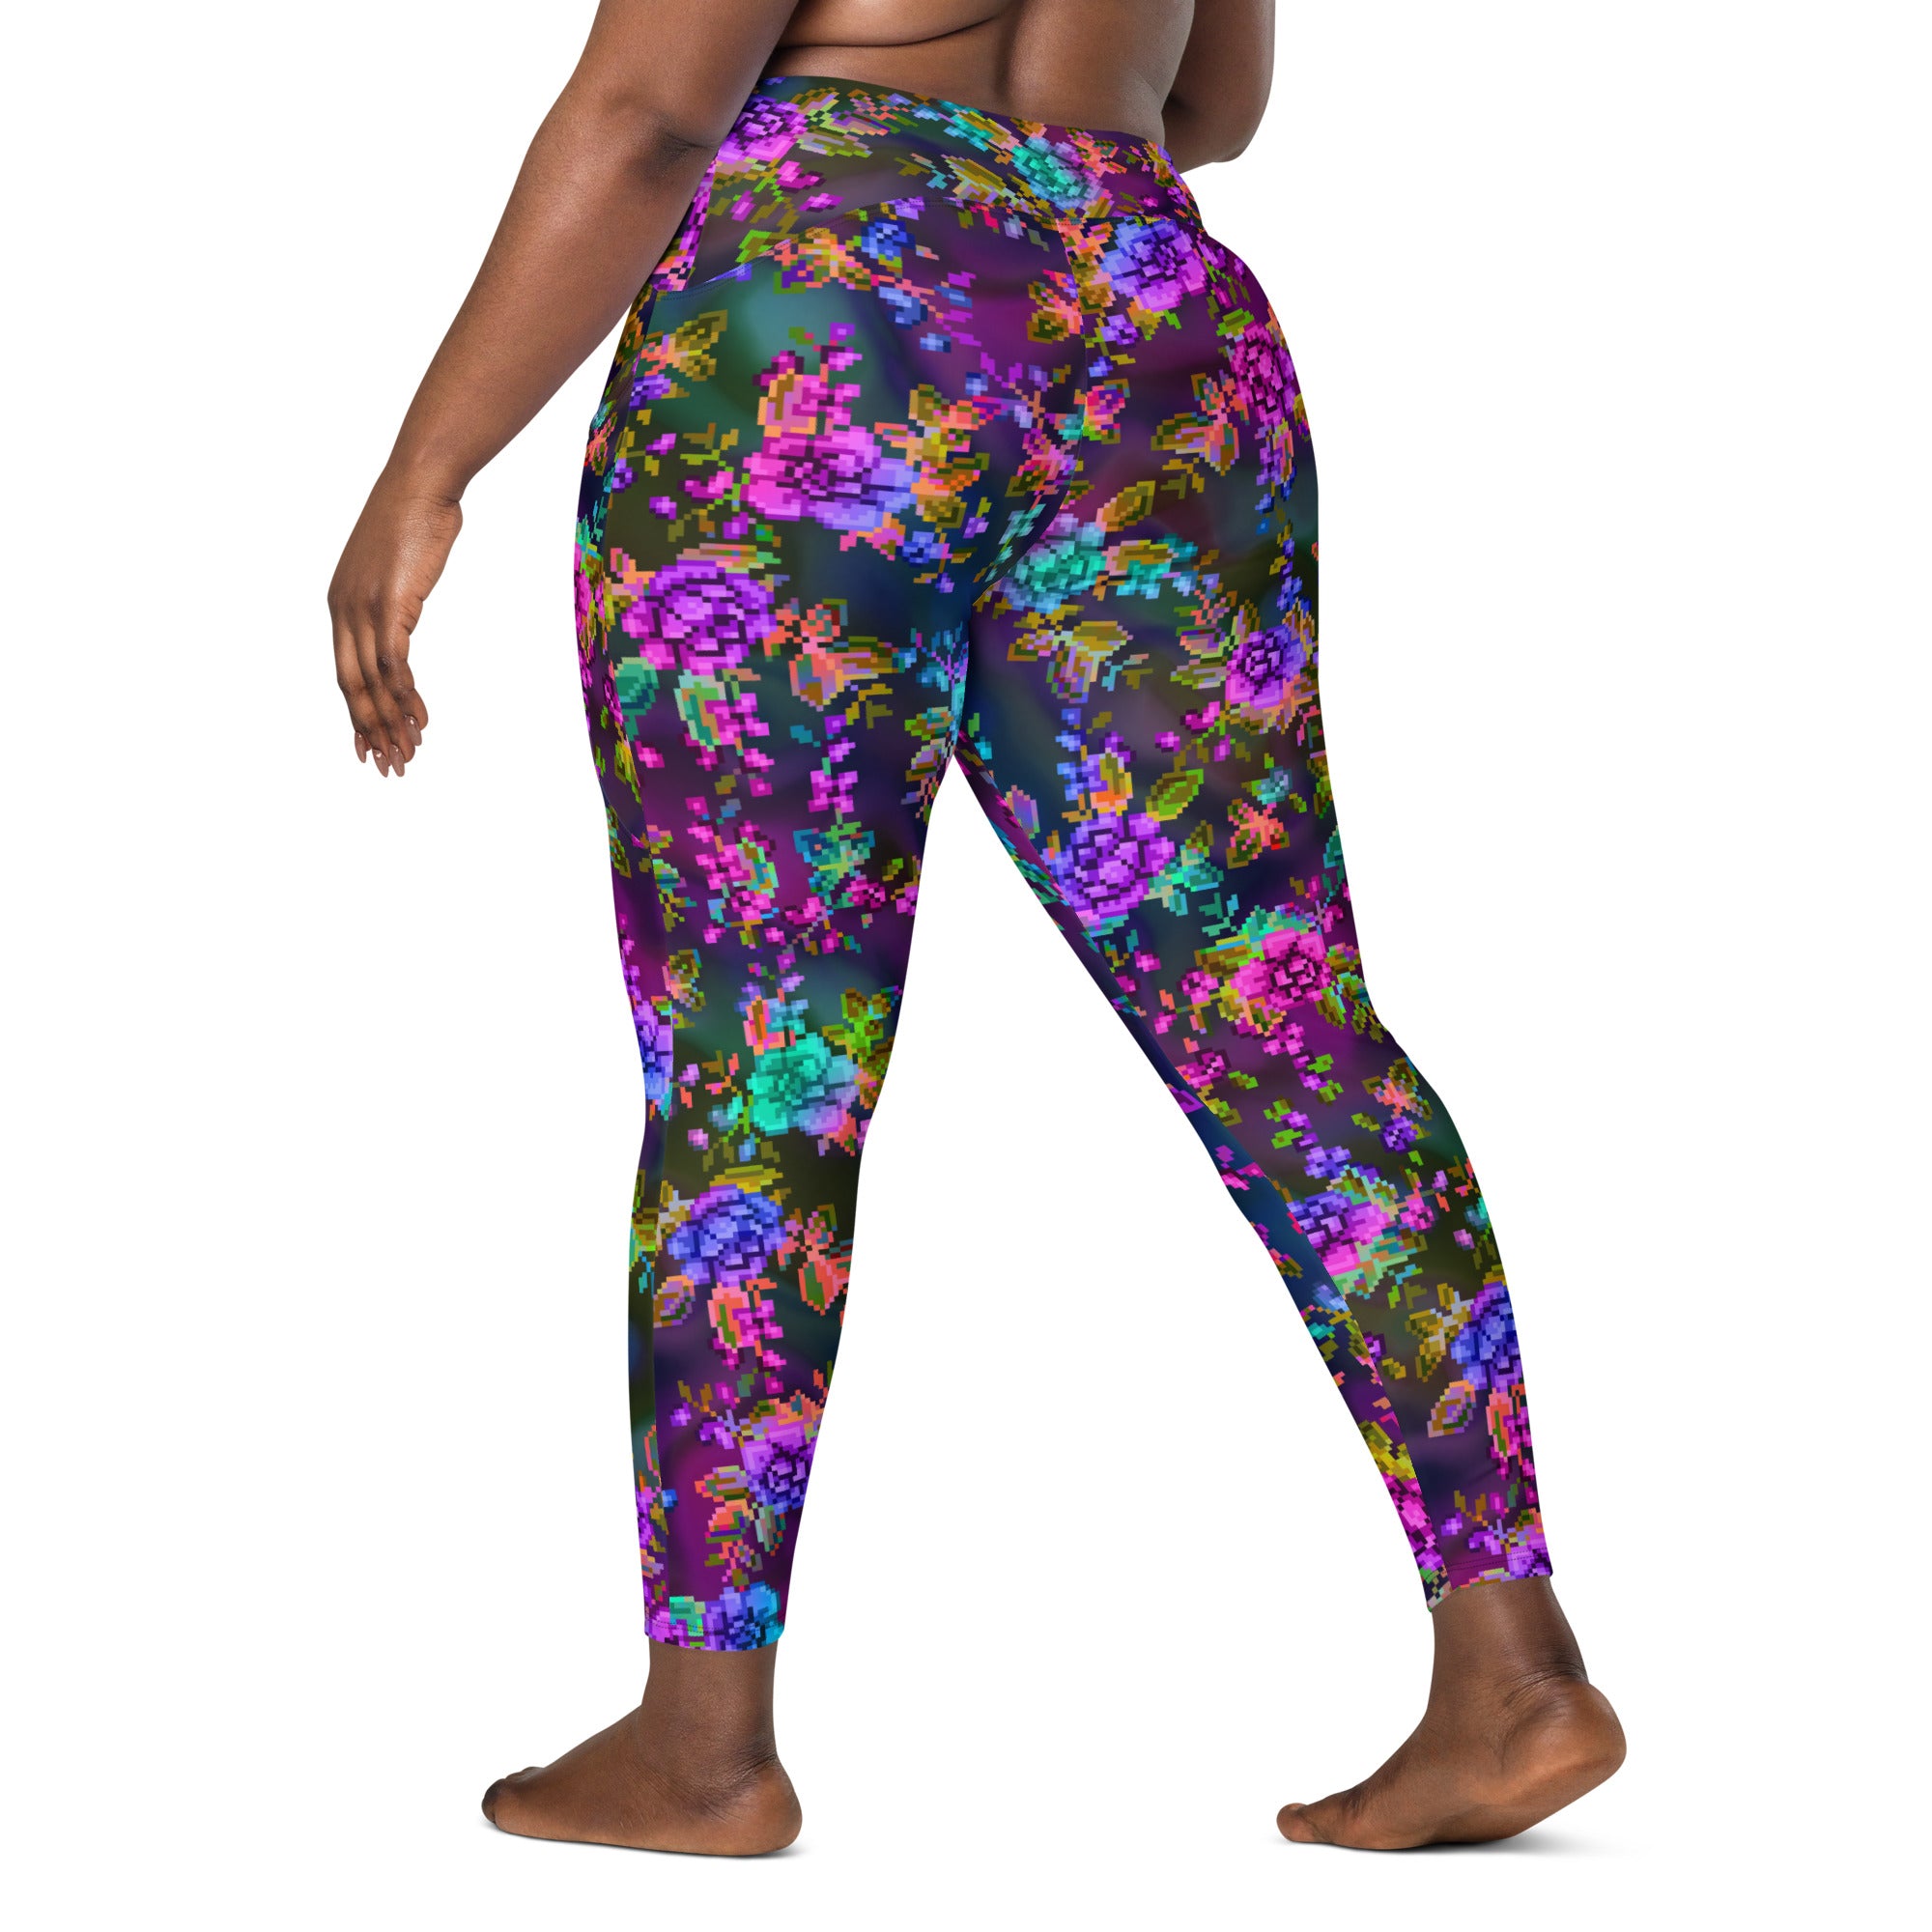 ✨AVAILABLE NOW✨ Purple Retro Floral Print Leggings 3 Pack GHs